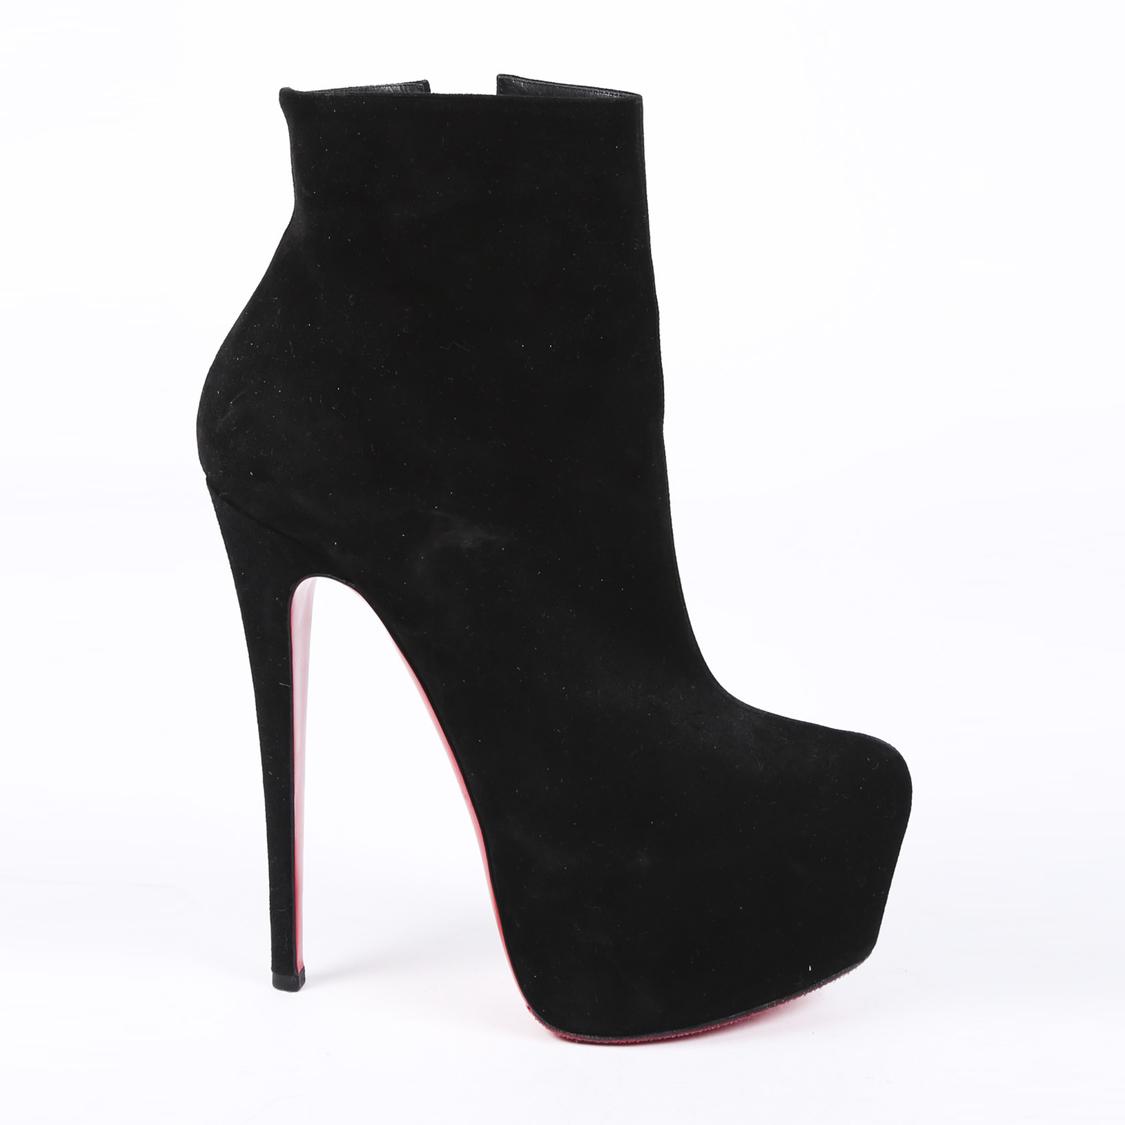 Christian Louboutin Daf Booty 160 Platform Boots in Black - Lyst